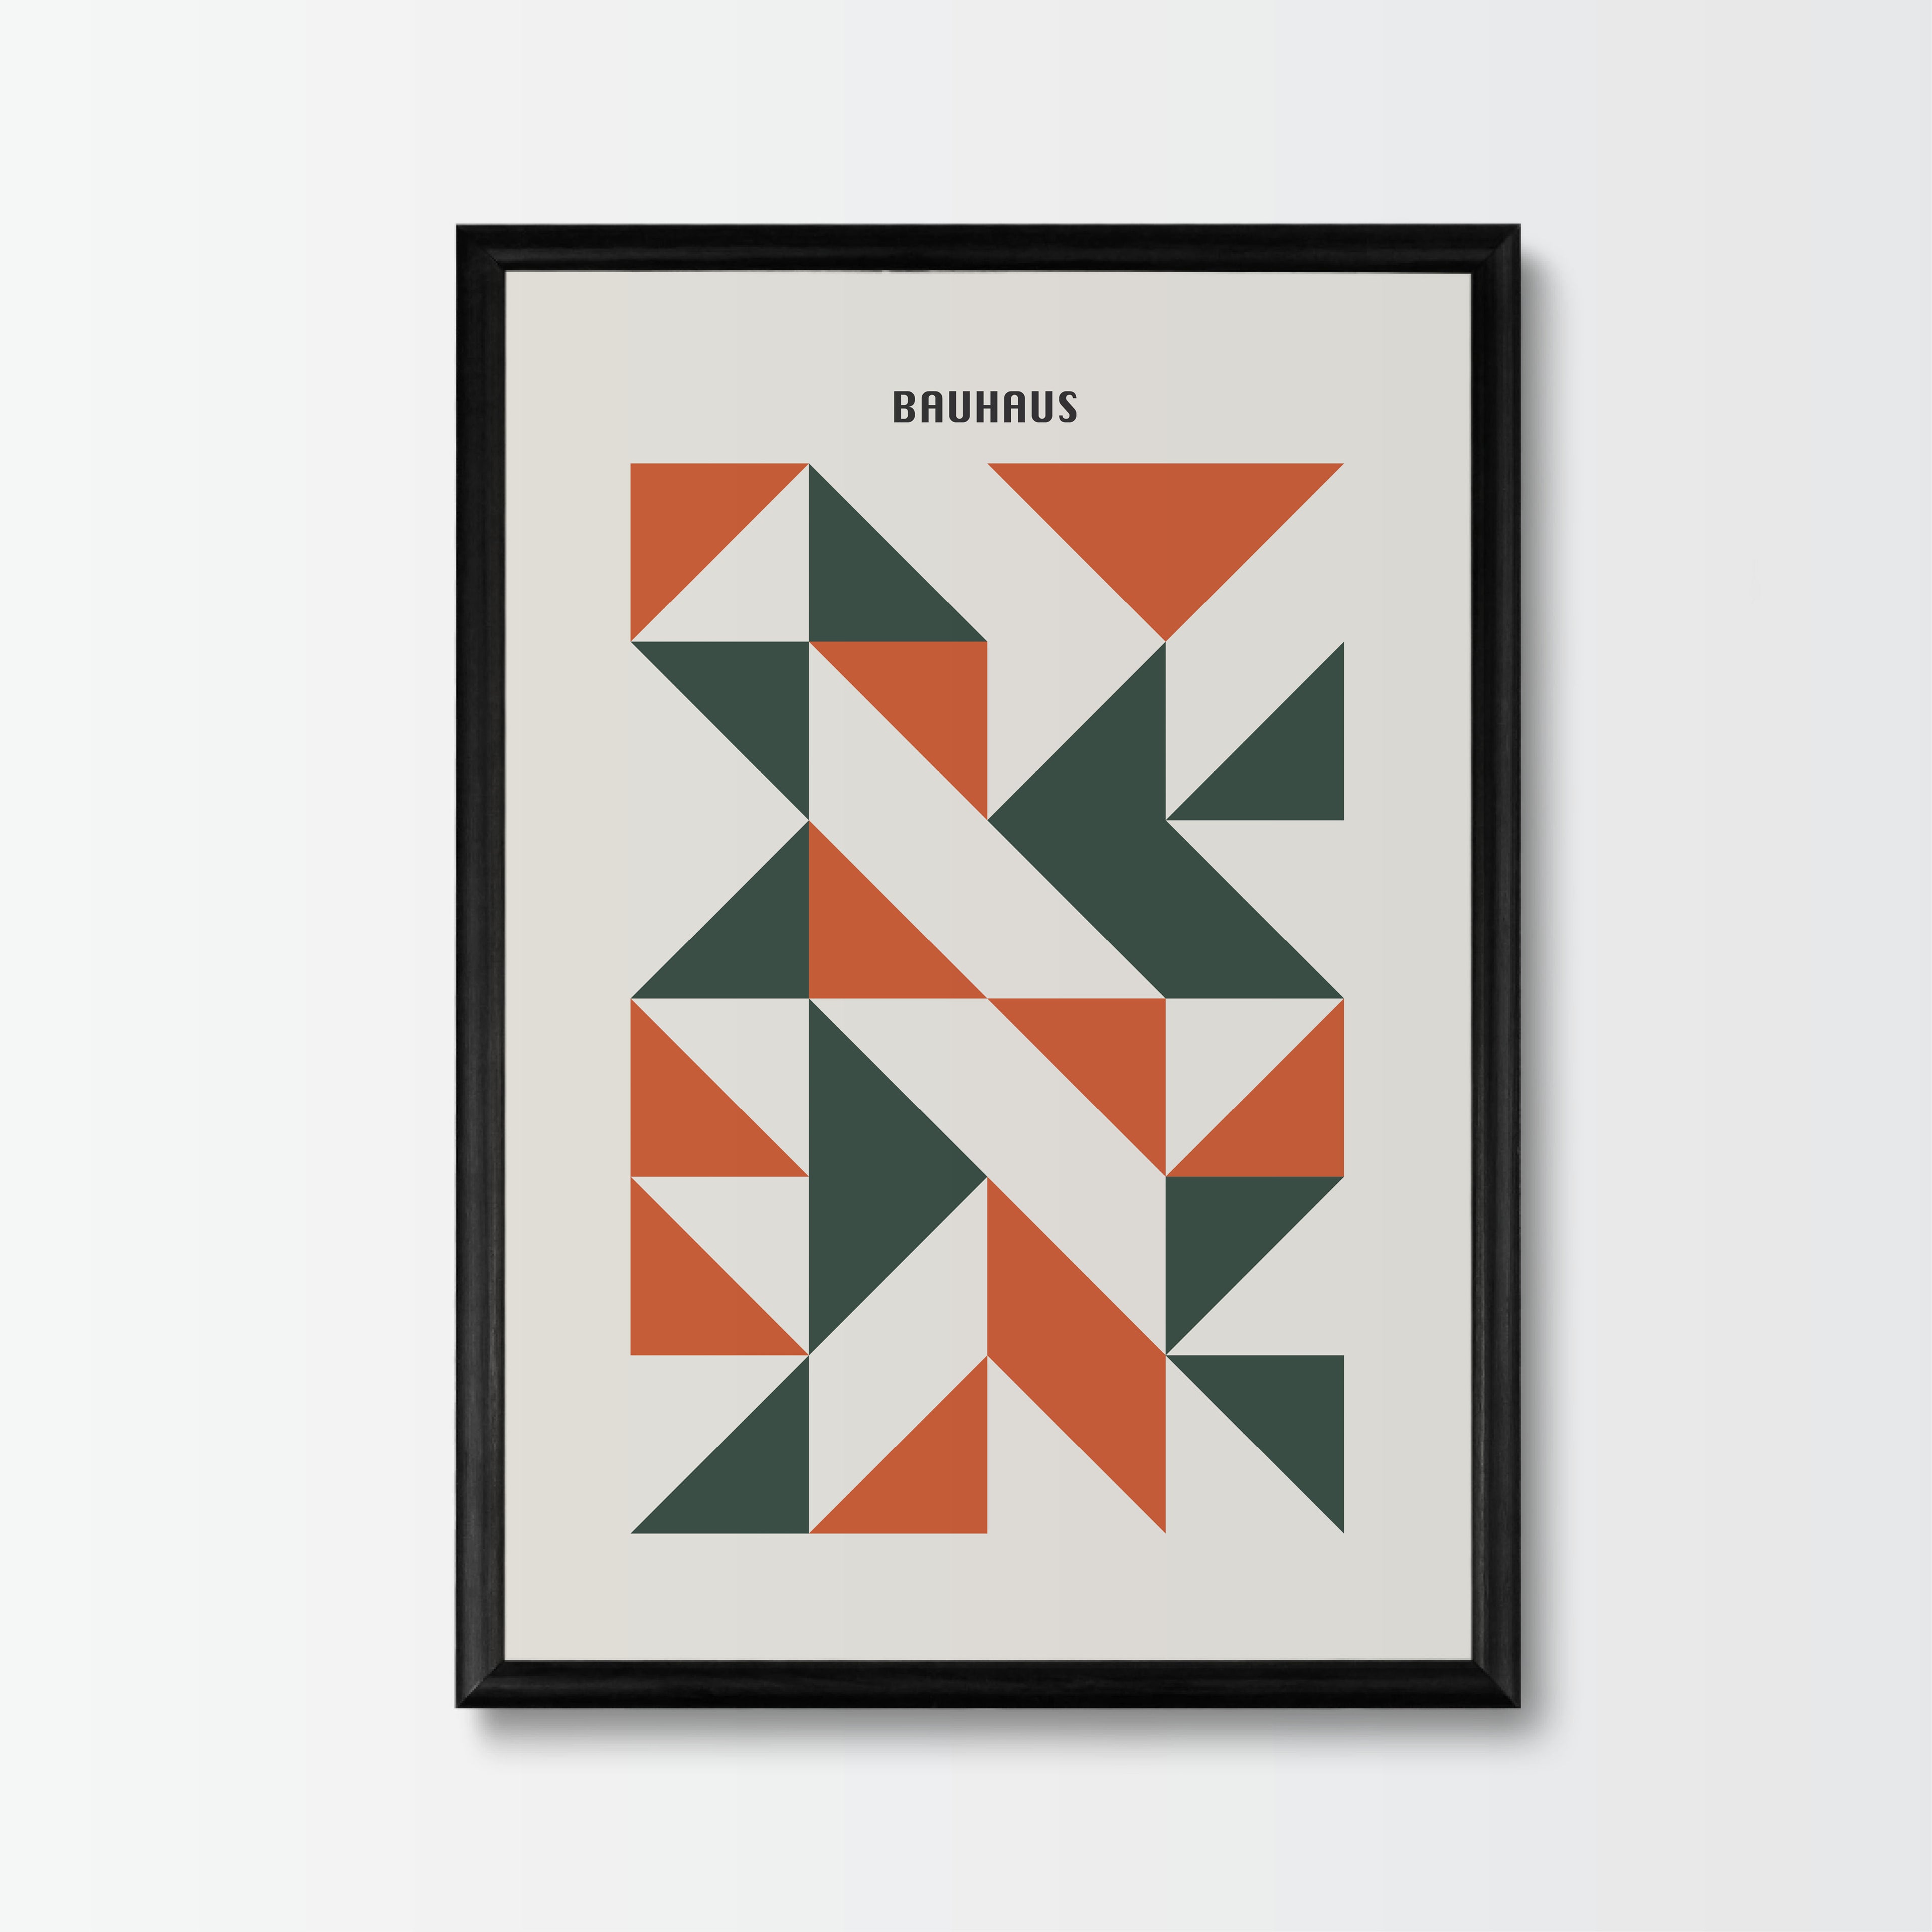 Bauhaus Poster Retro Edges - Add sophistication to your space